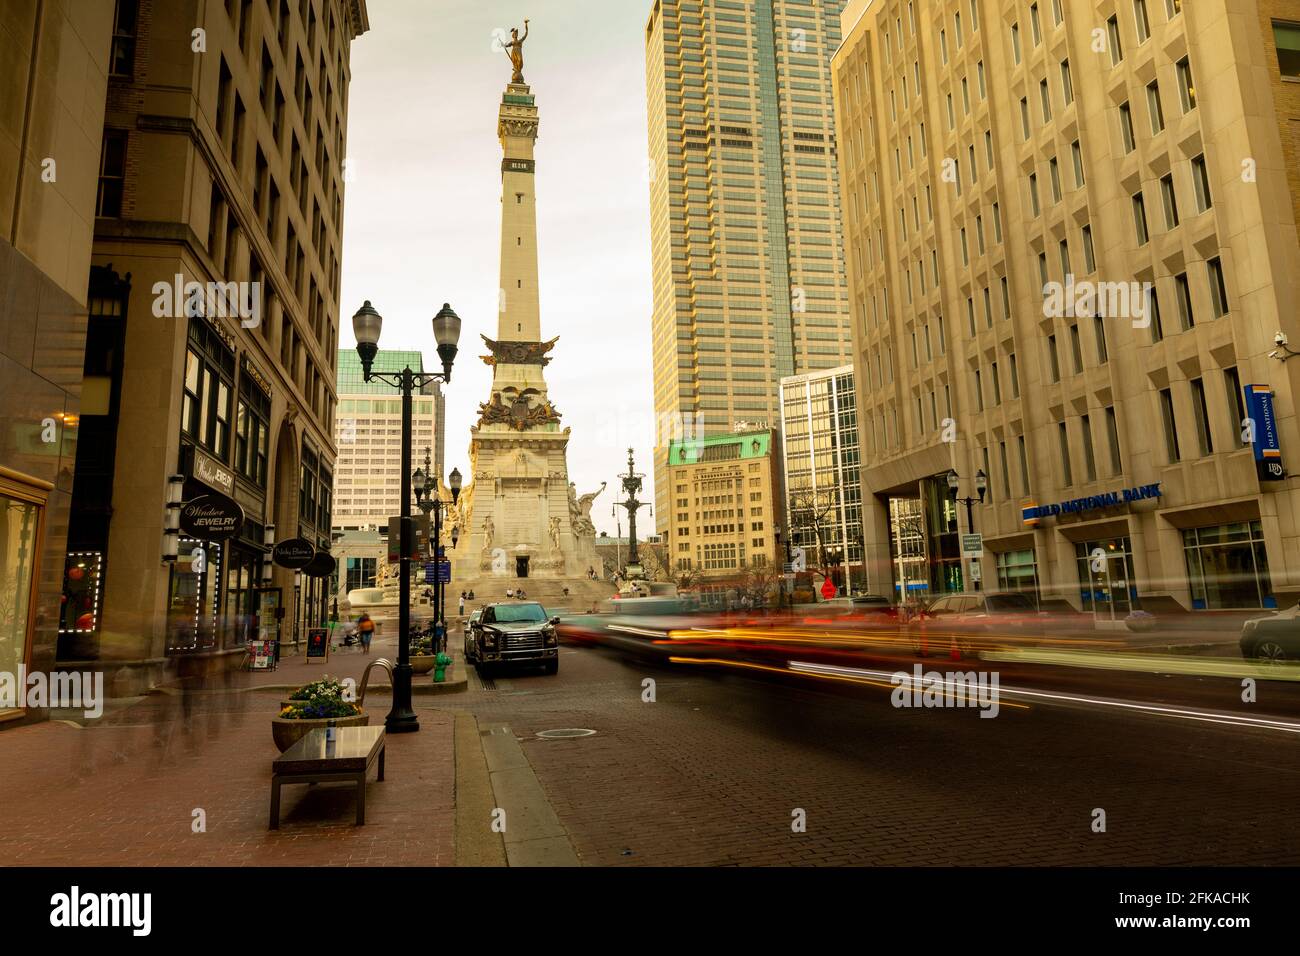 Indianapolis, IN - April 4, 2021: The Indiana State Soldiers and Sailors Monument monument on Monument Circle in Indianapolis, IN with motion blur in Stock Photo